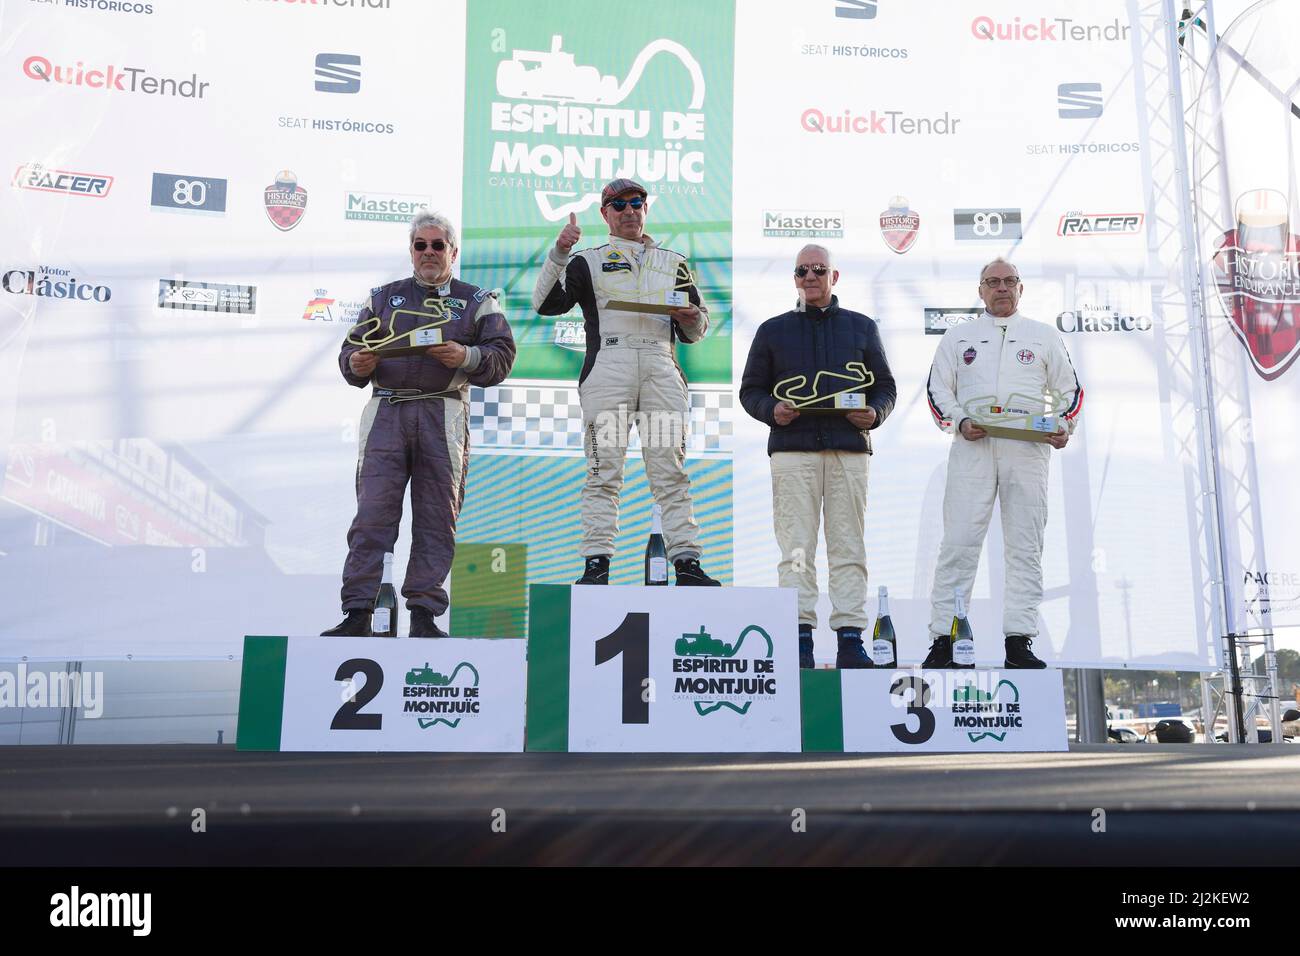 2nd April 2022 ; Circuit de Barcelona-Catalunya, Spain; Espiritu de Montjuic: podium ceremony (L-R) 2nd place Lotus Seven driven by Florent Cazalot, 1st place Ford GT 40 driven by Jordi Puig and Alberto Pecanins, 3rd place Lotus Seven driven by Joao Mira Gomes and Nuno Afoito celebrate after the race Stock Photo